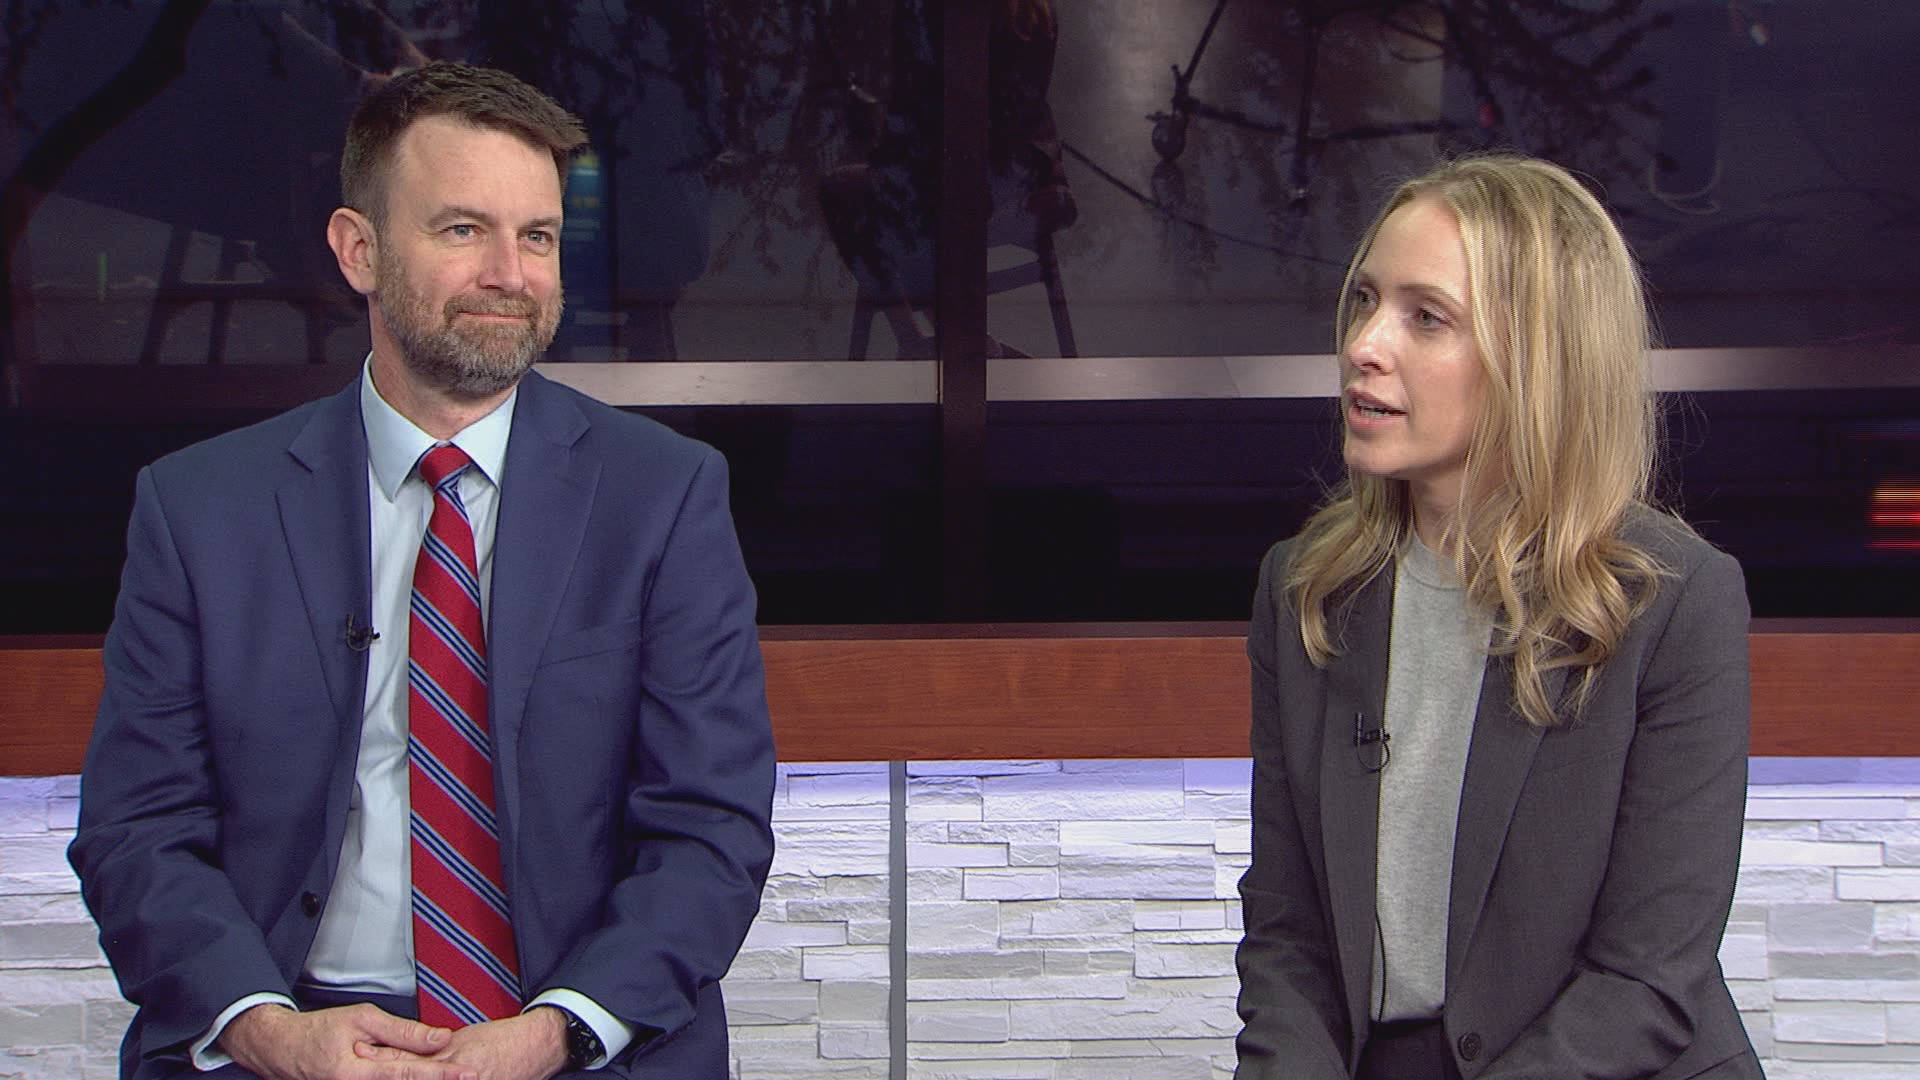 12News Political Insider Brahm Resnik sits with Mark Kokanovich and Michelle Hogan discuss the latest updates in the 'fake electors' case in Arizona.